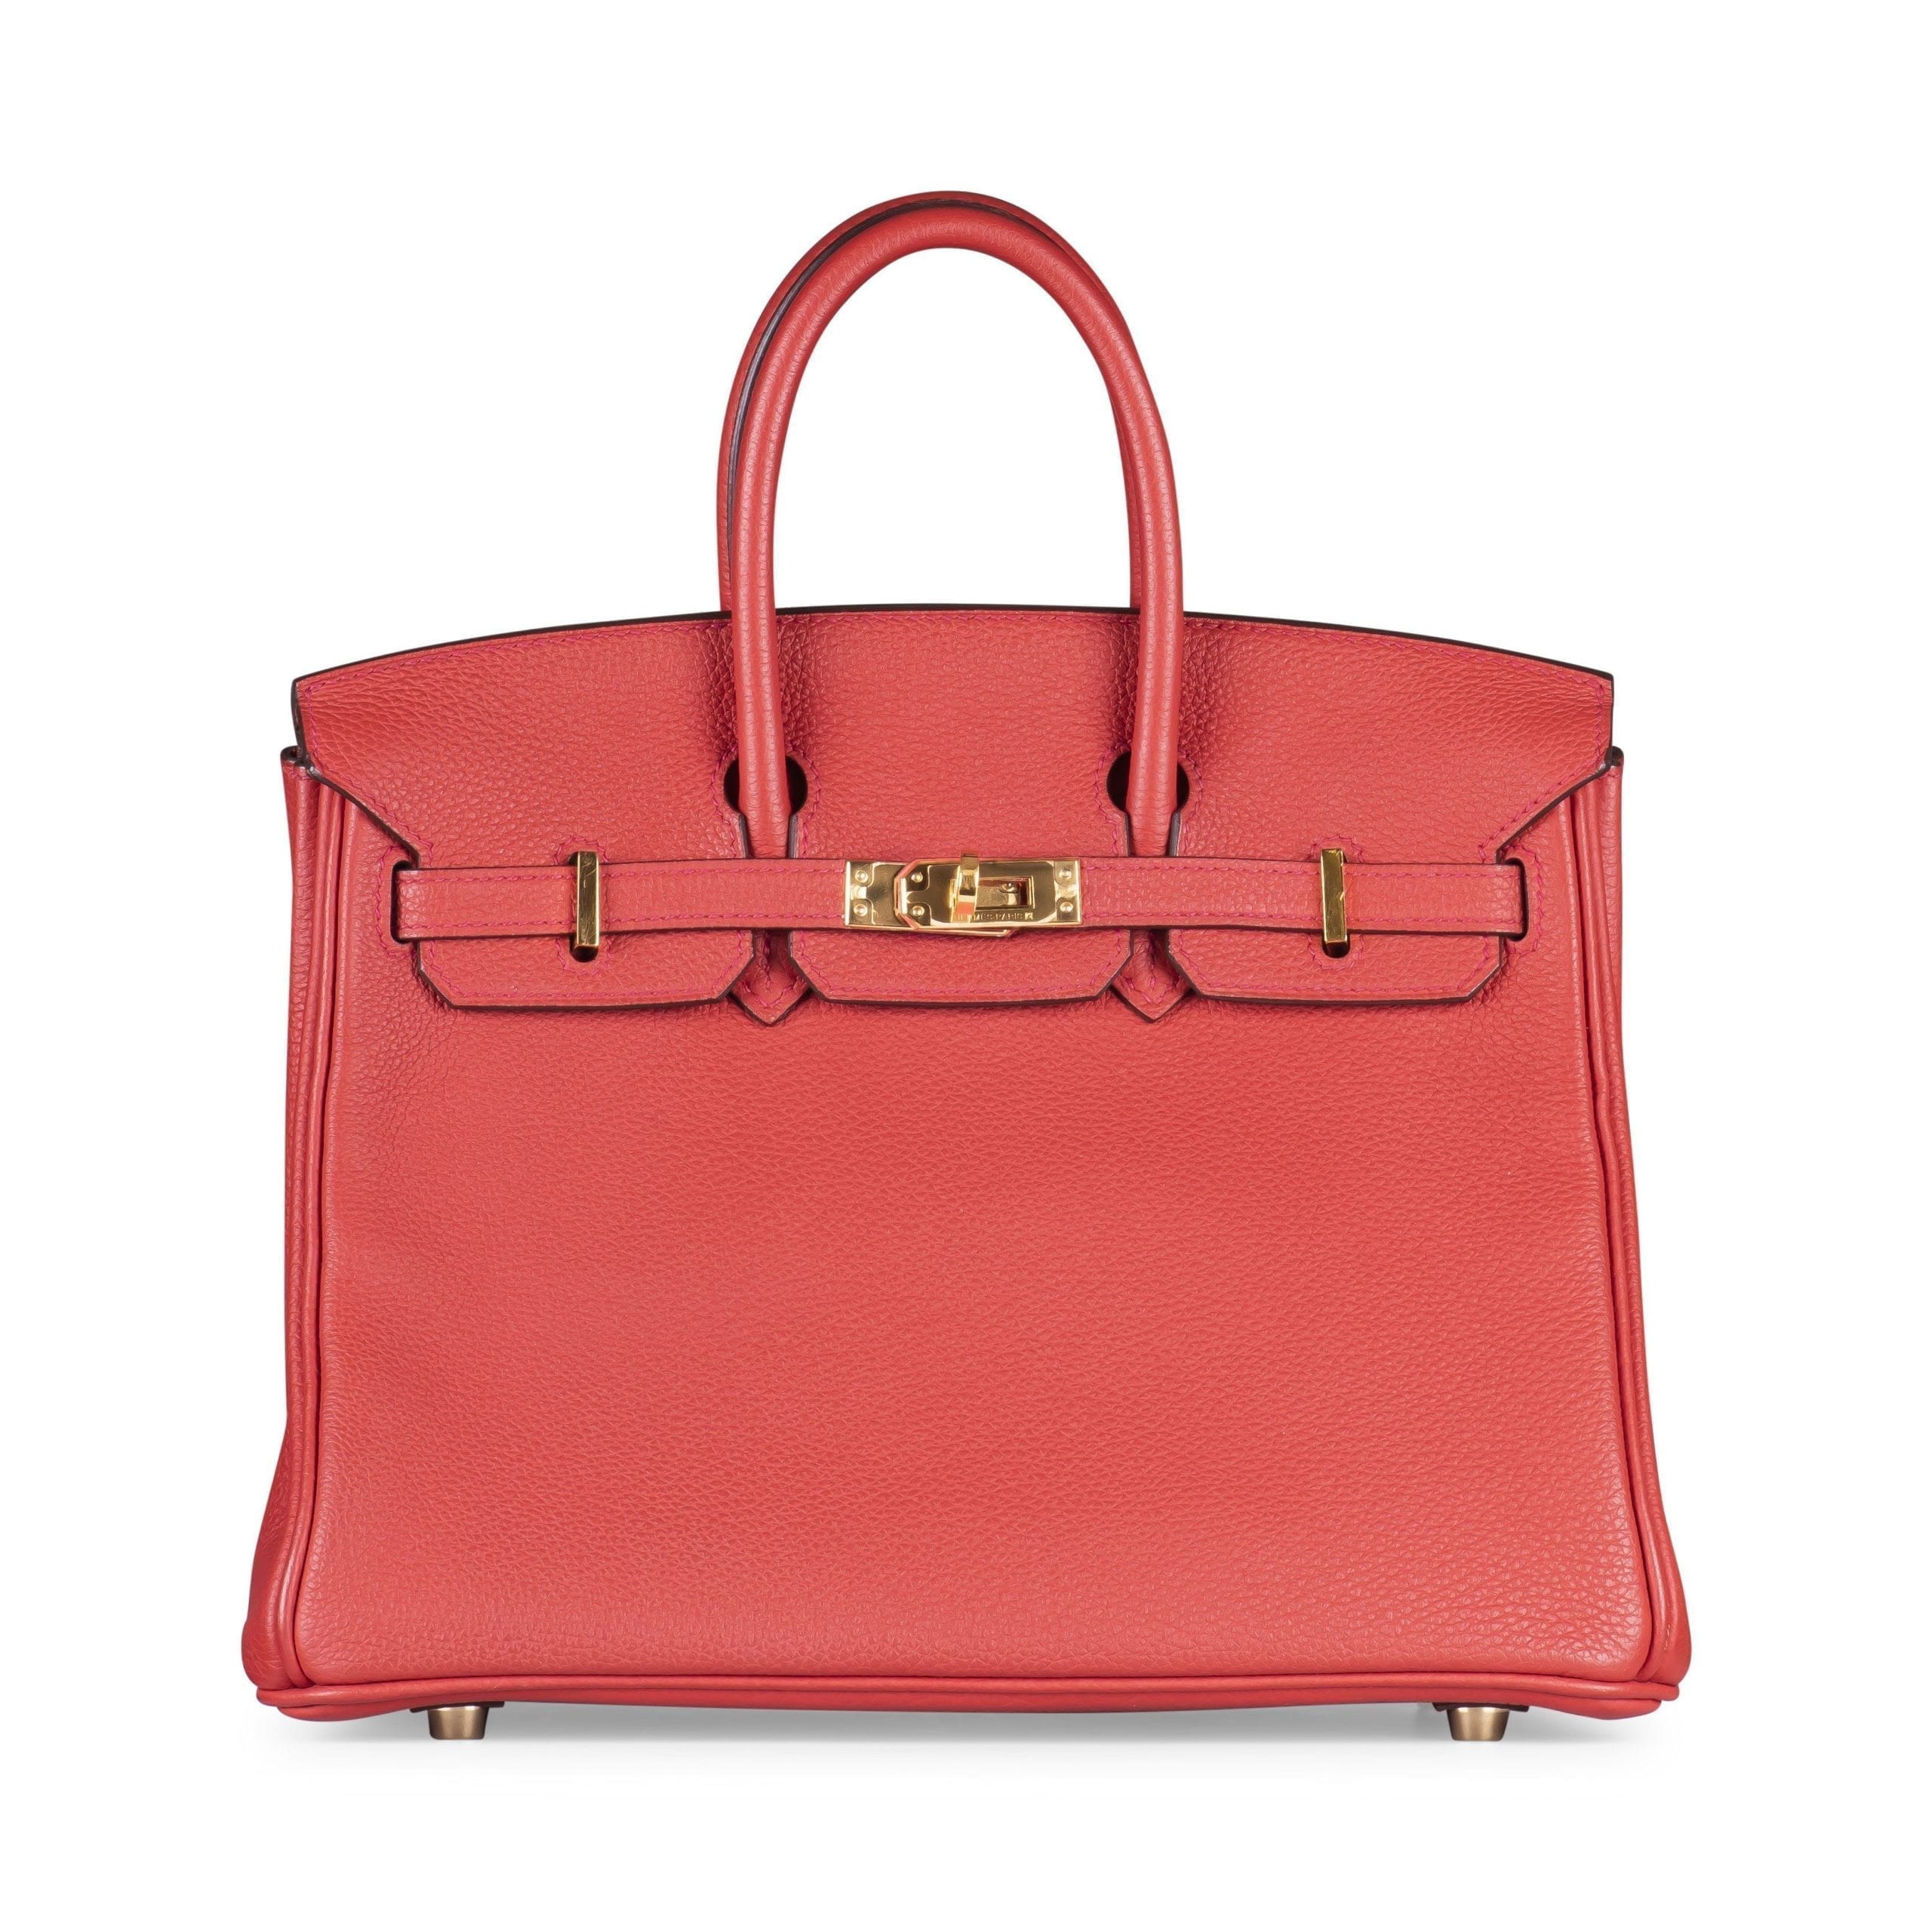 Hermes Birkin 25cm Red Vermillon Togo Leather with Gold Hardware.